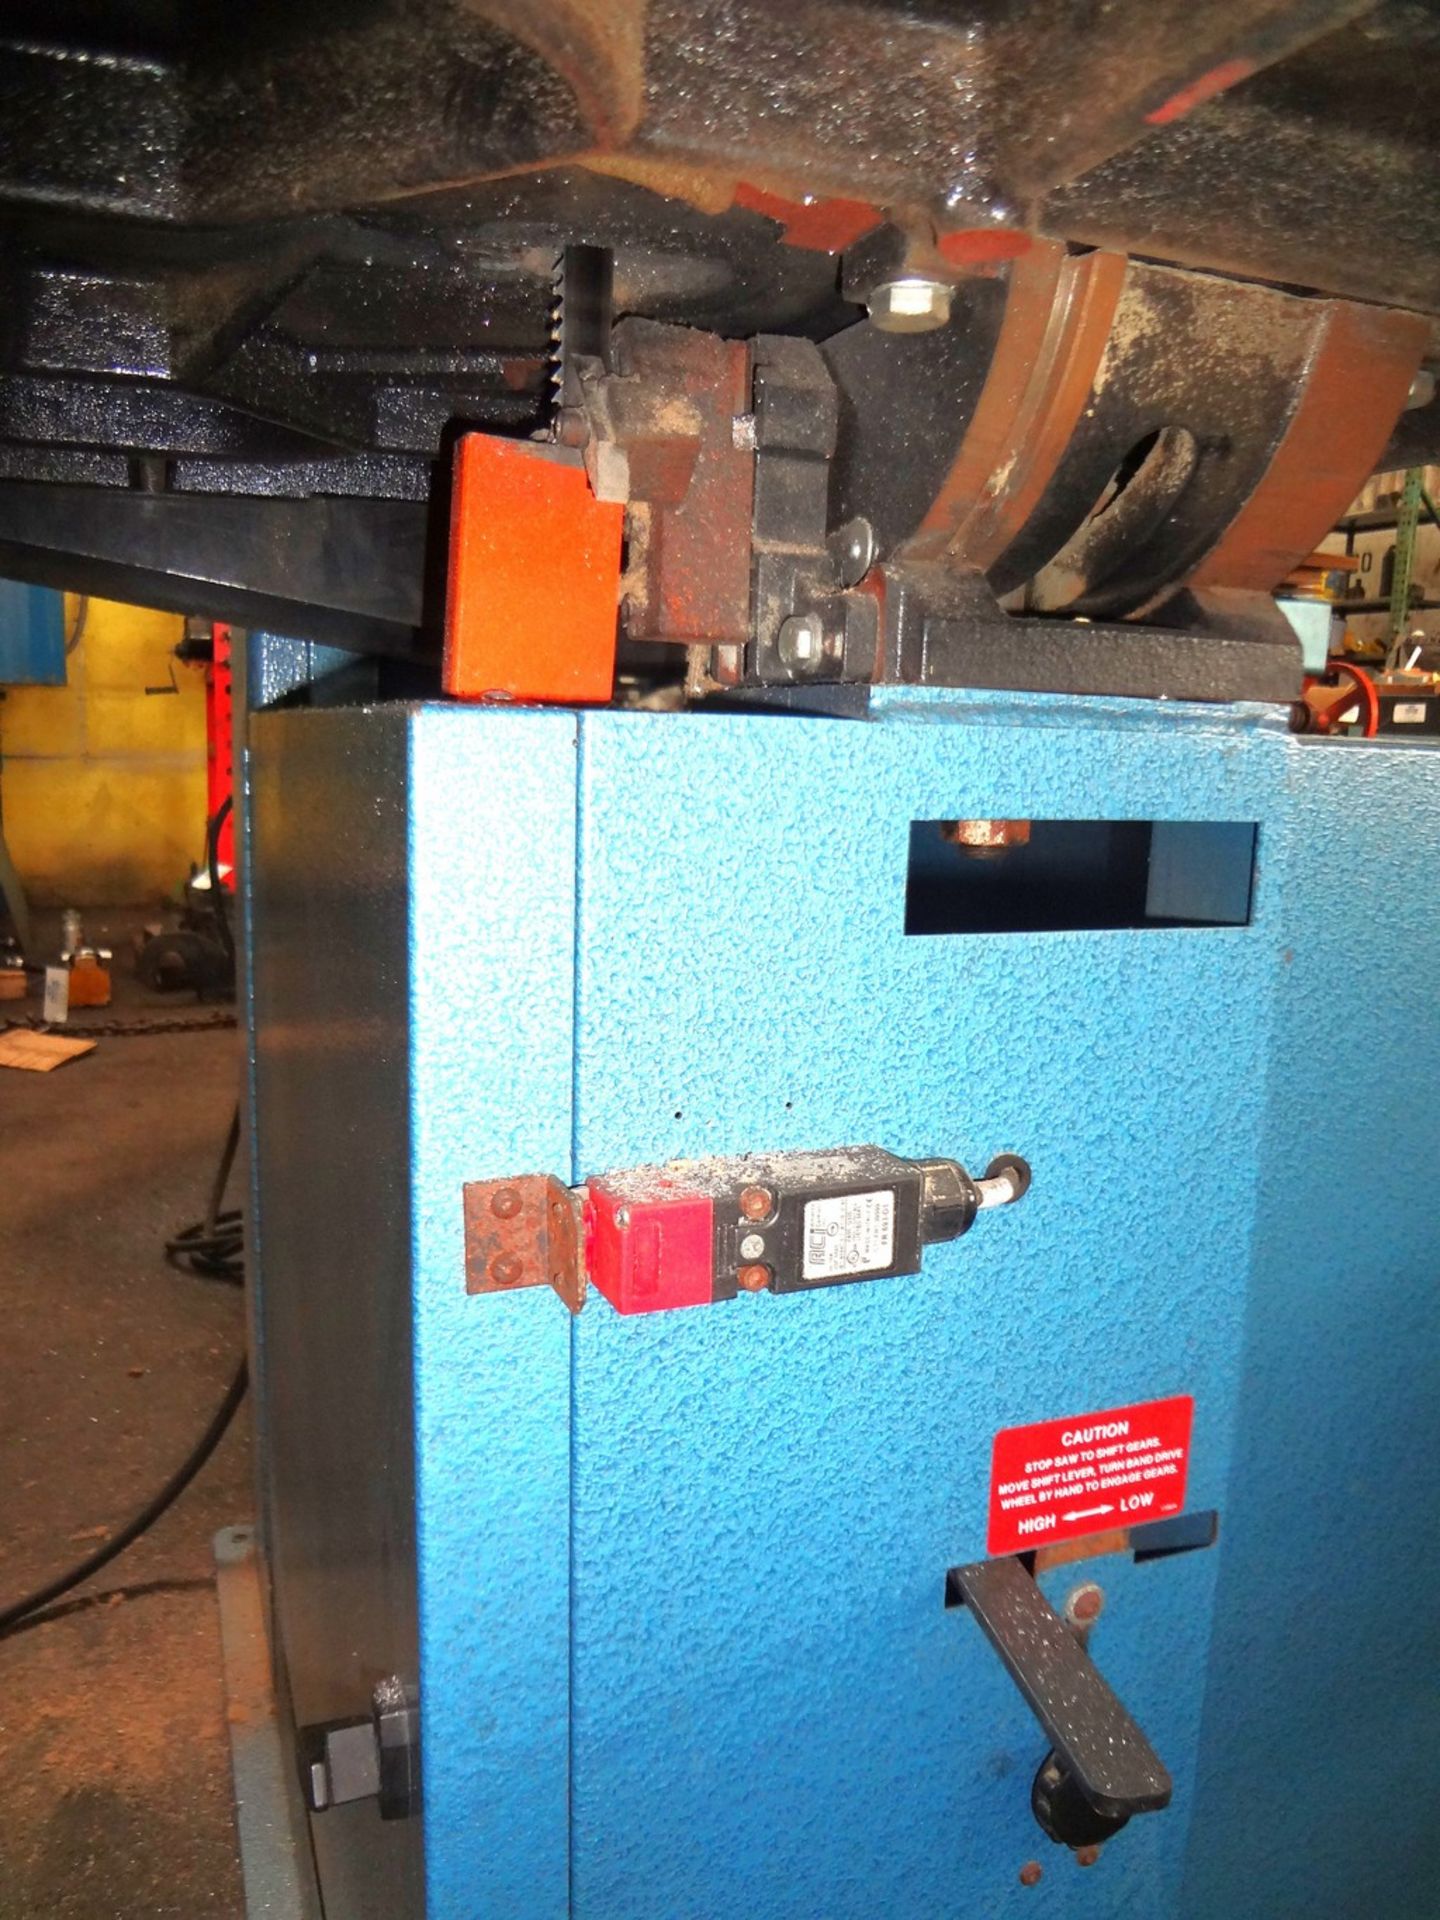 DoAll 2613-V3 26" Vertical Band Saw - Image 4 of 6